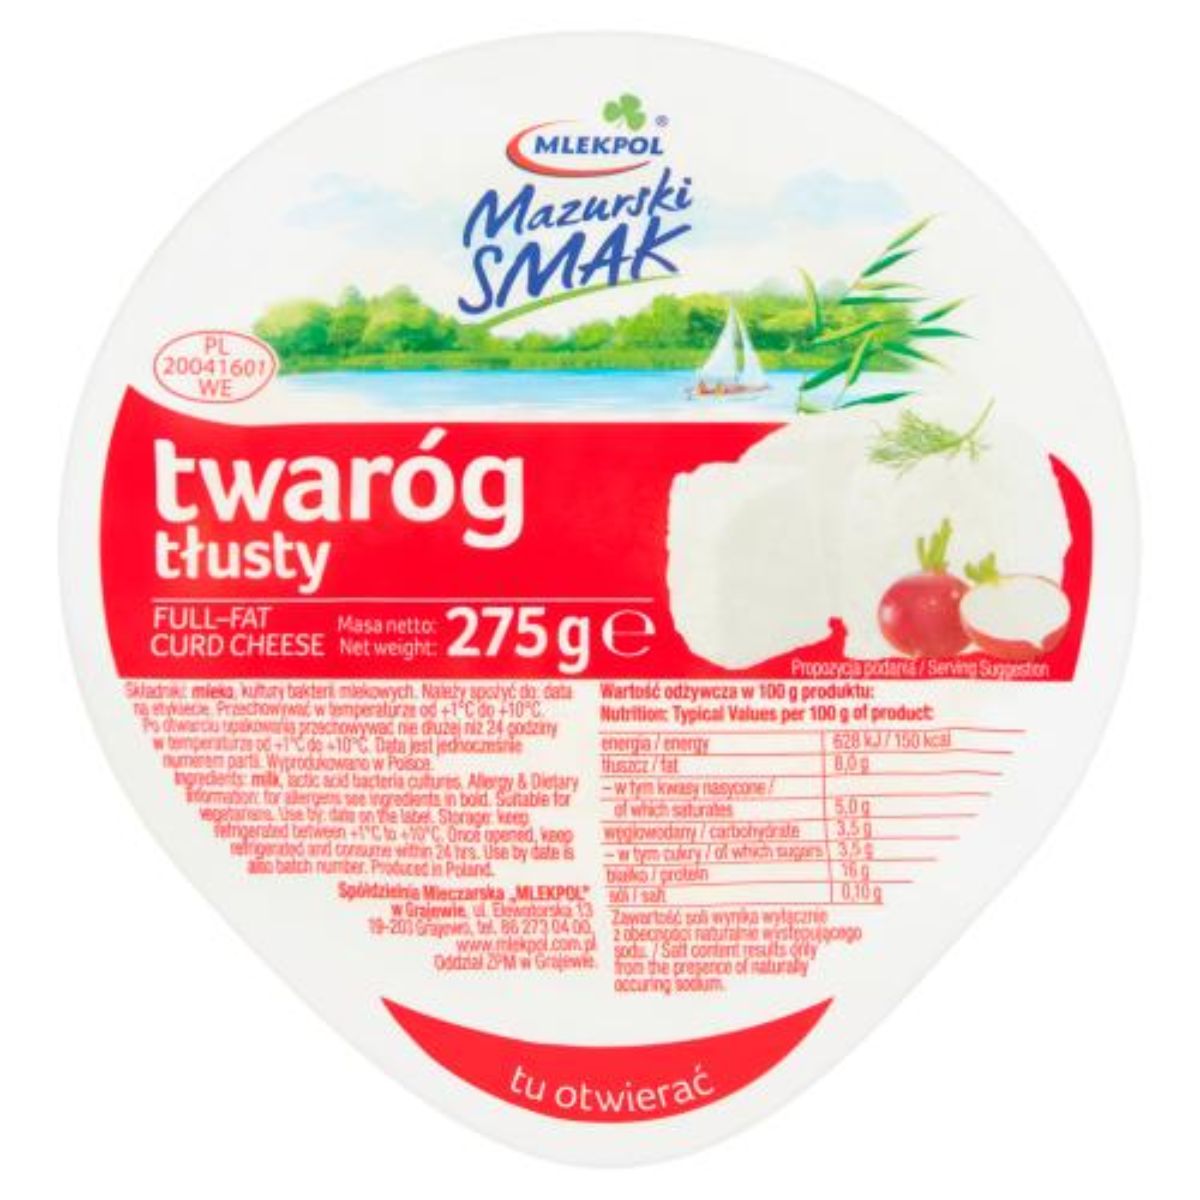 Mlekpol - Full Fat Cottage Cheese - 275g tussy Mlekpol - Full Fat Cottage Cheese - 275g tussy Mlekpol - Full Fat Cottage Cheese - 275g tussy.